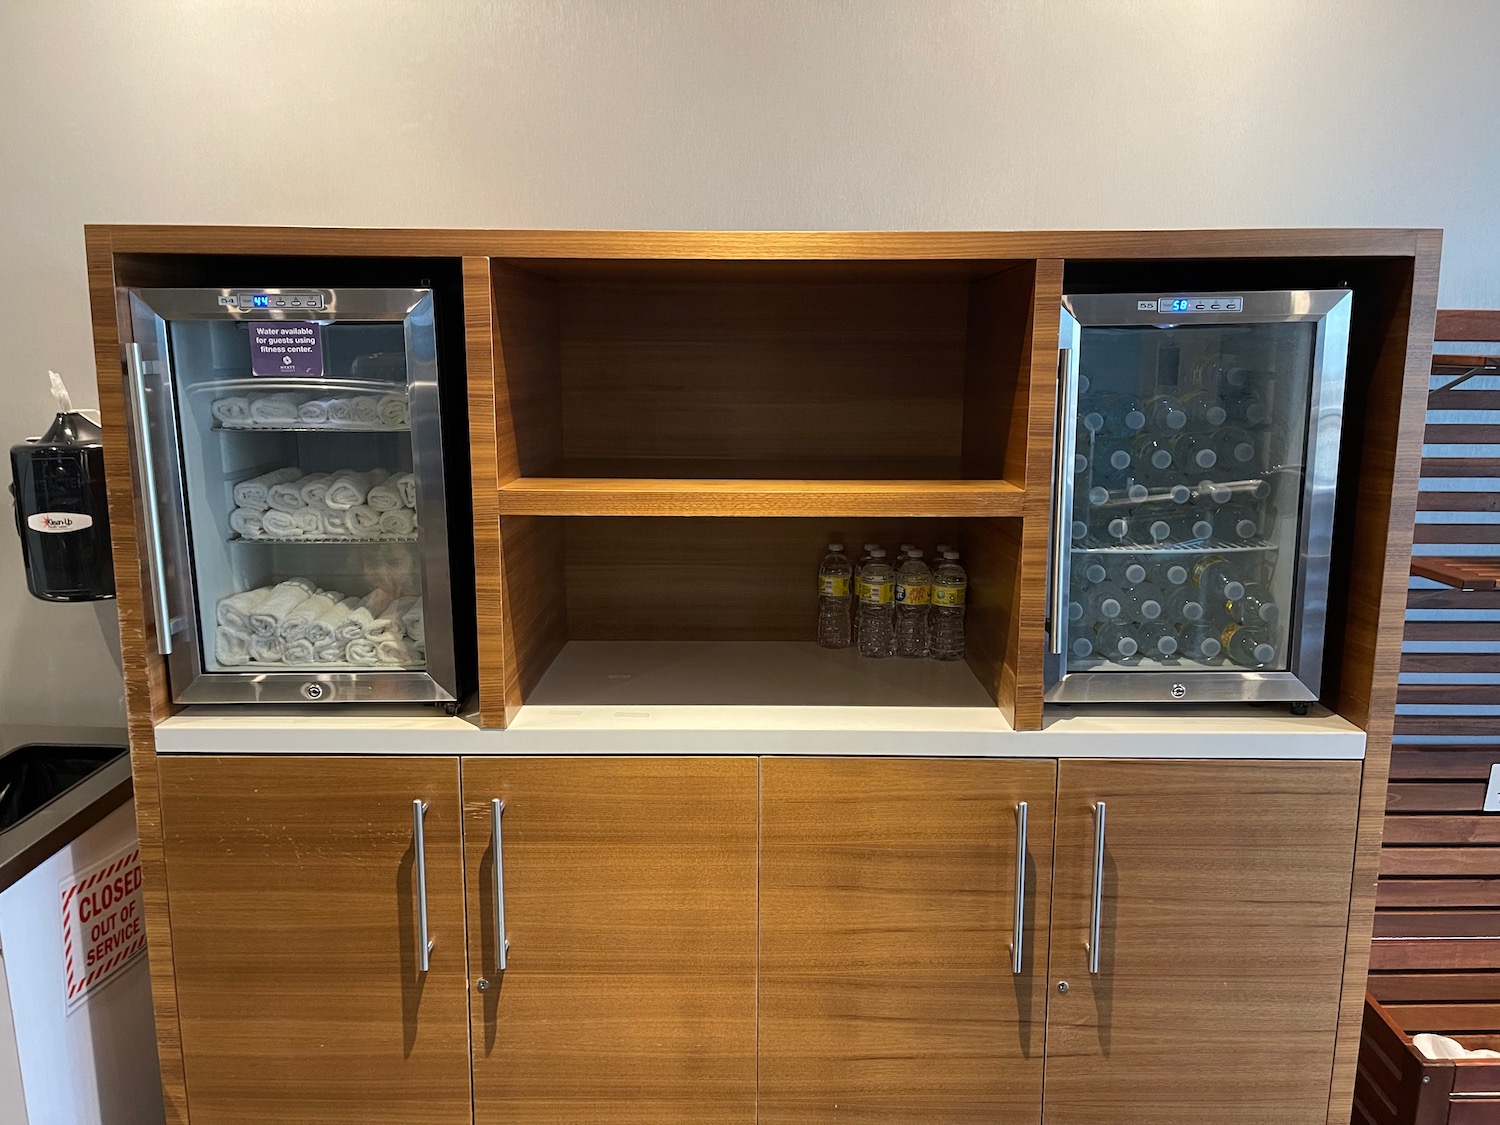 a two shelves with a beverage dispenser